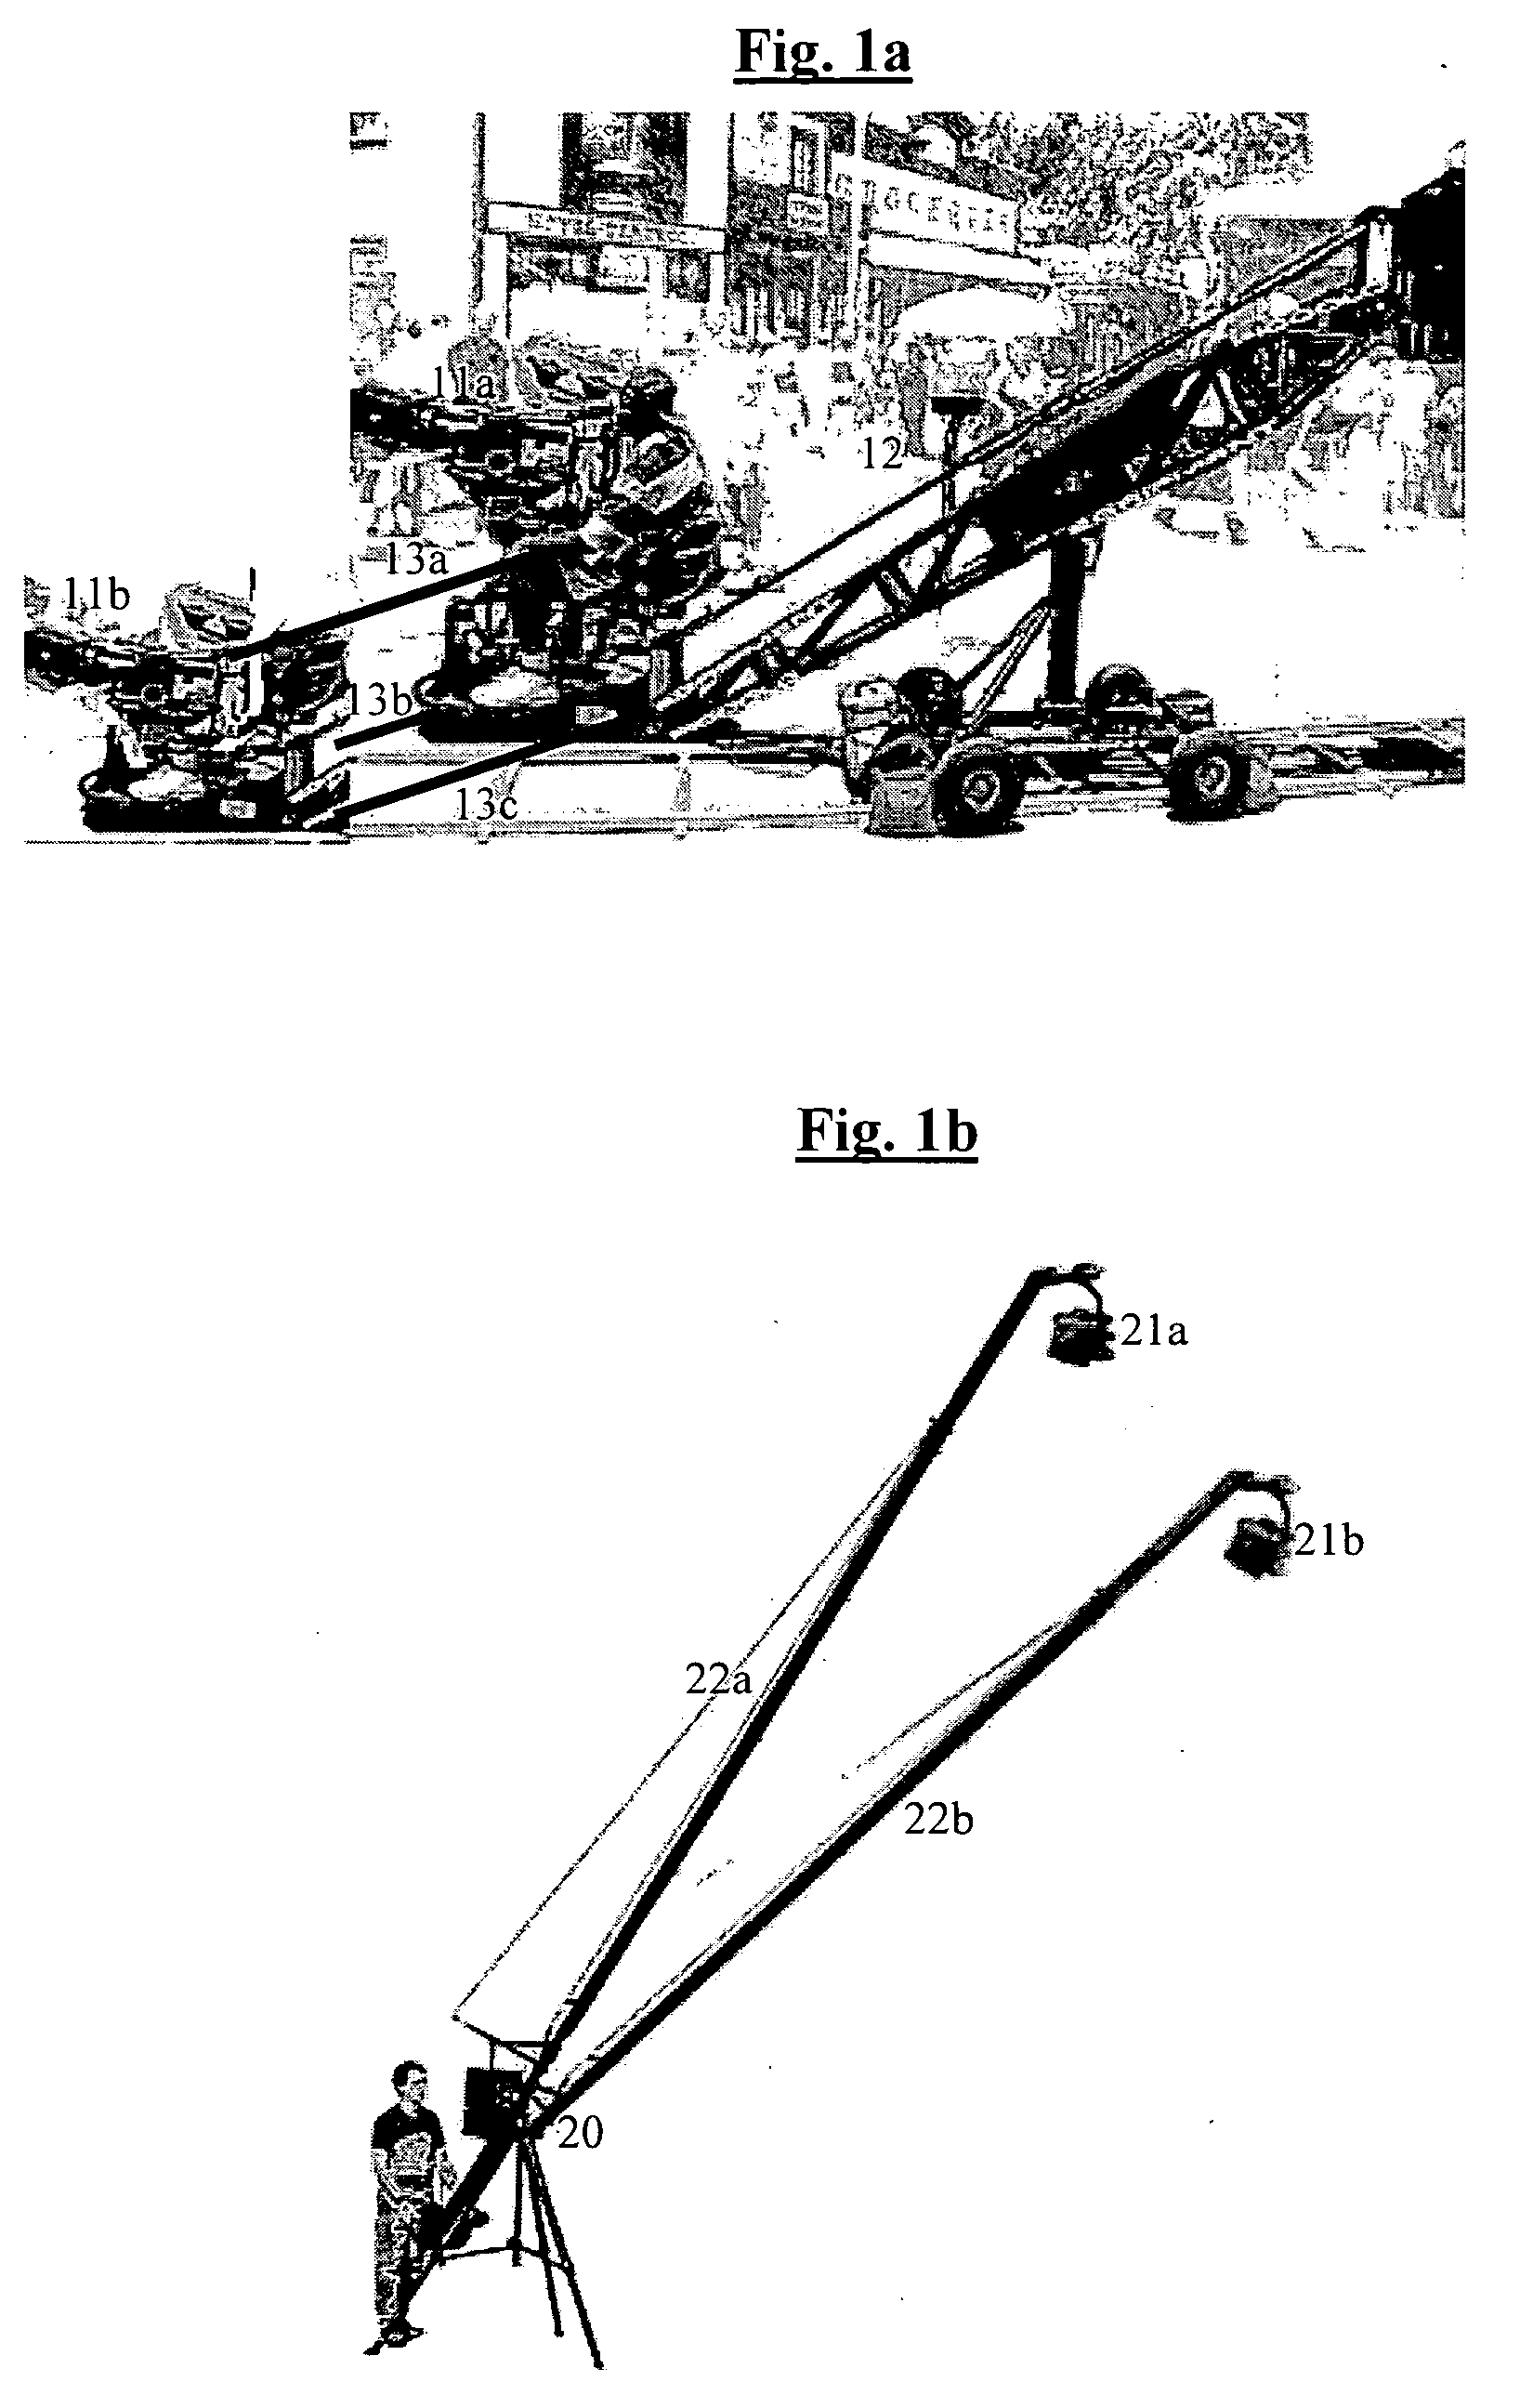 System and method for 3D photography and/or analysis of 3D images and/or display of 3D images